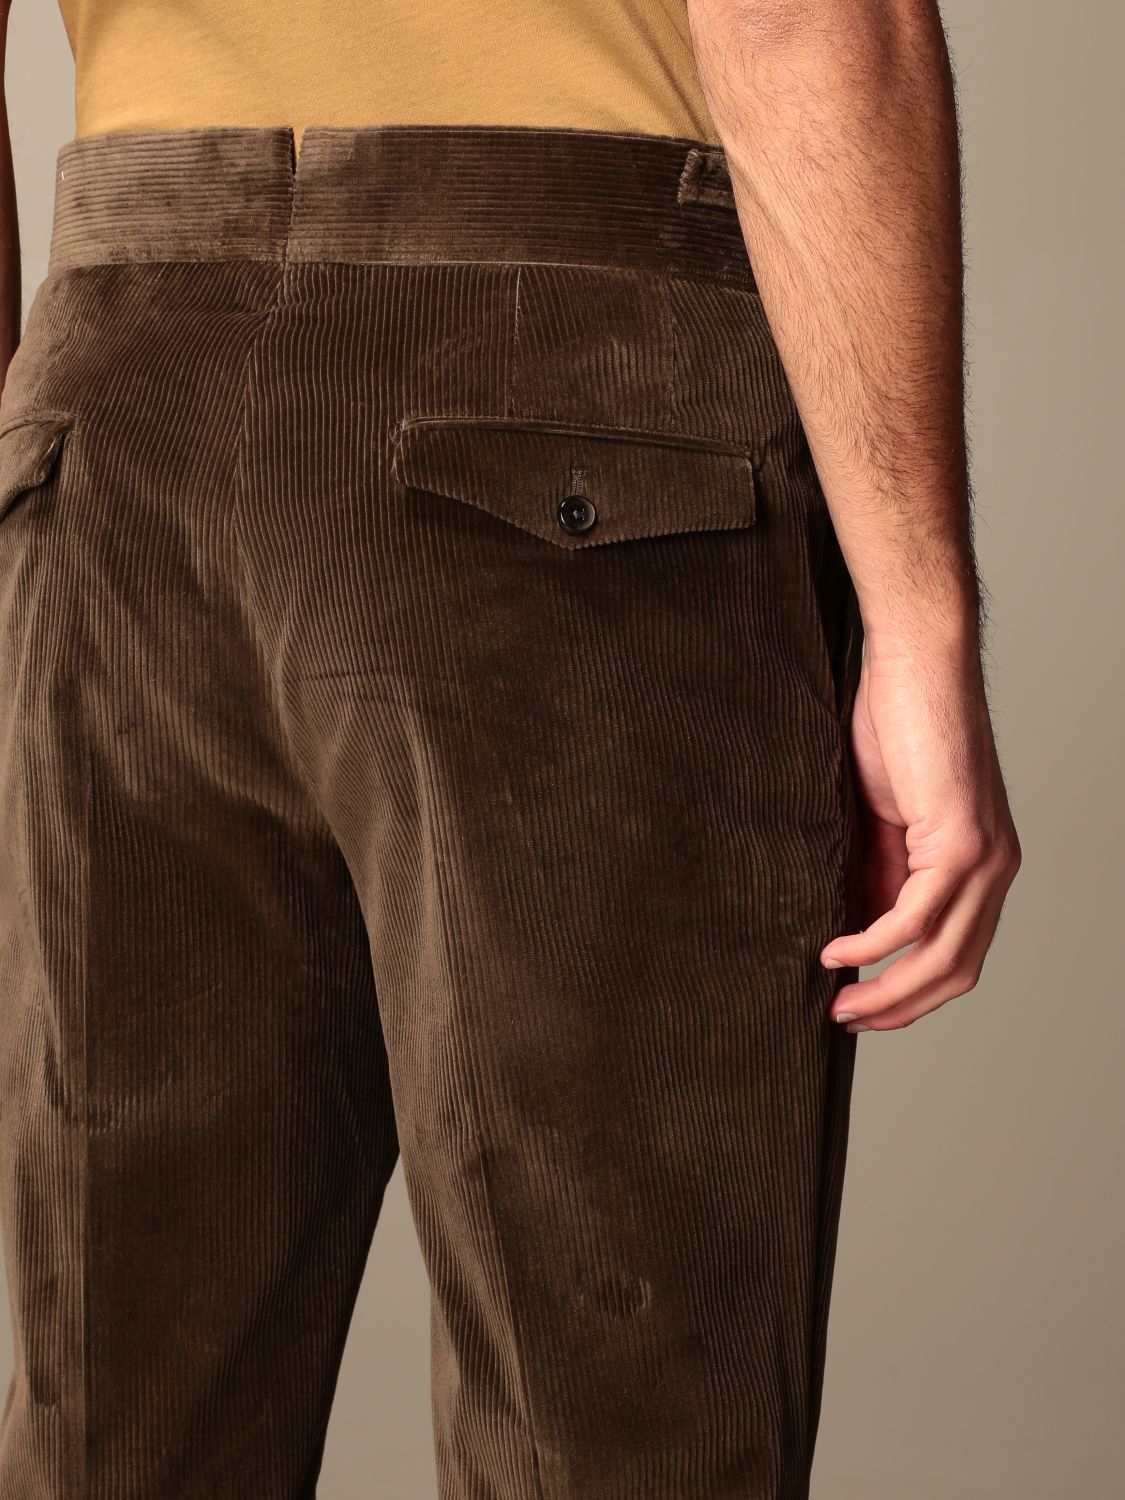 Pt Outlet: ribbed trousers with buckle | Pants Pt Men Brown | Pants Pt ...